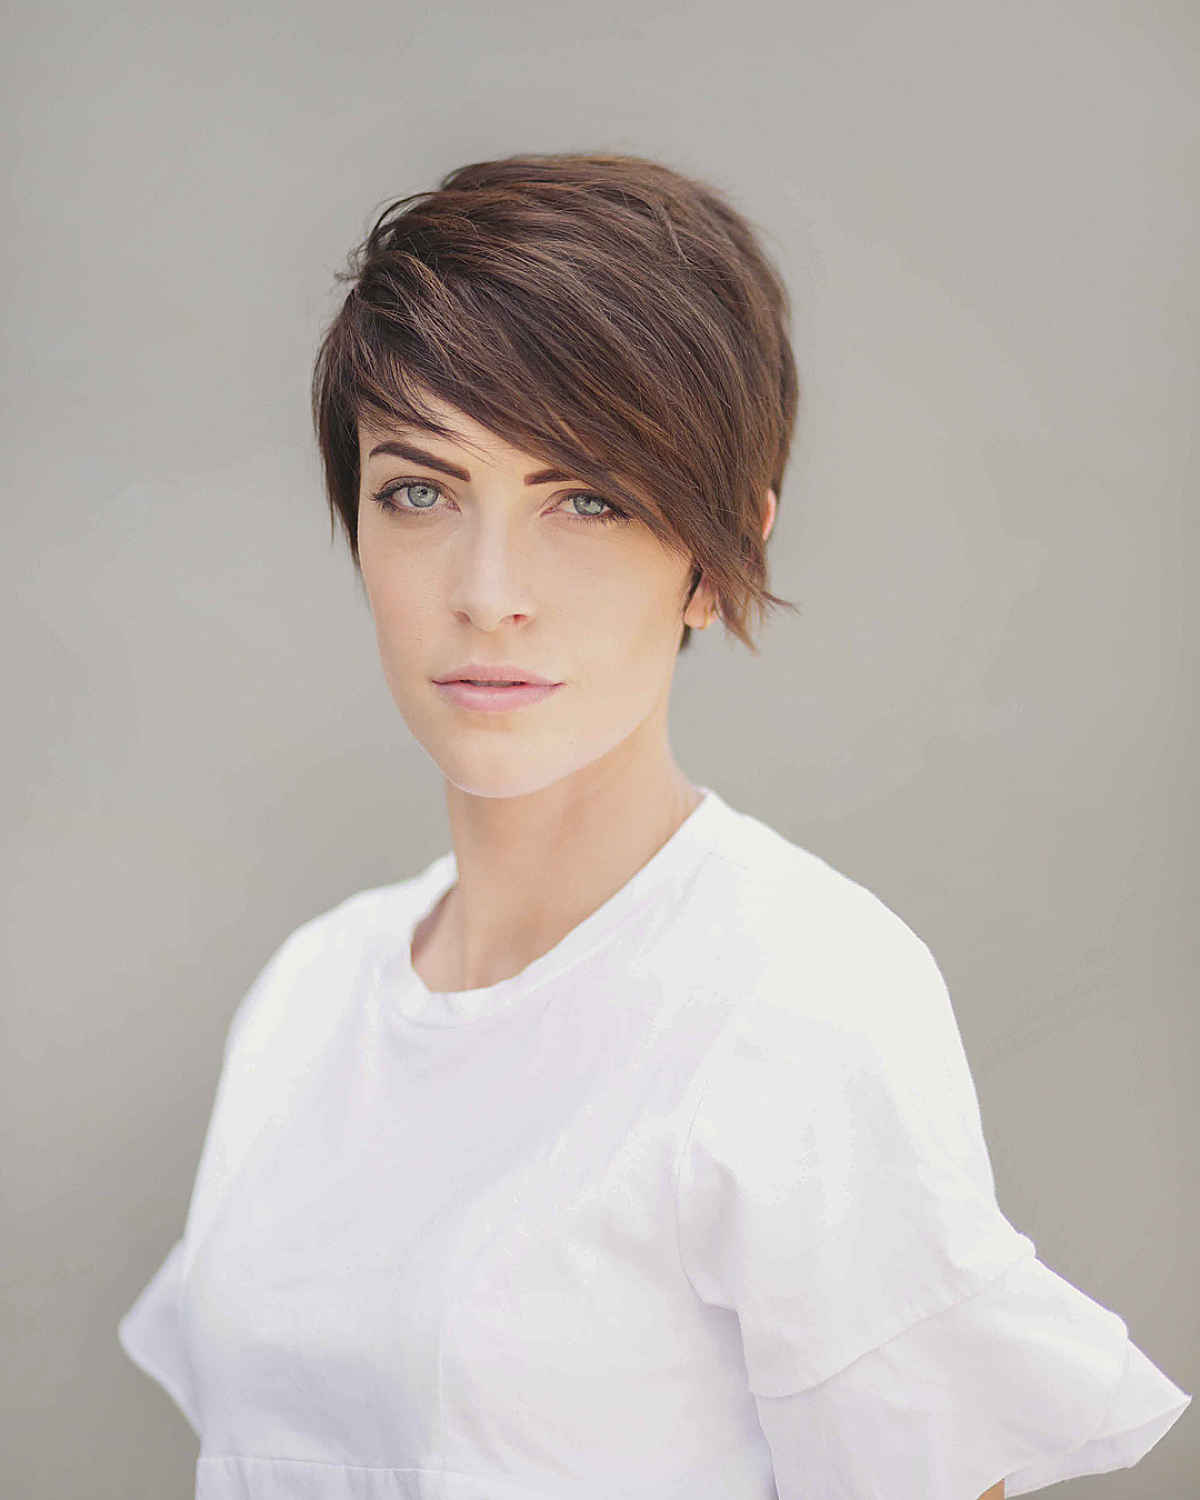 Short Pixie Cut with Side Bangs